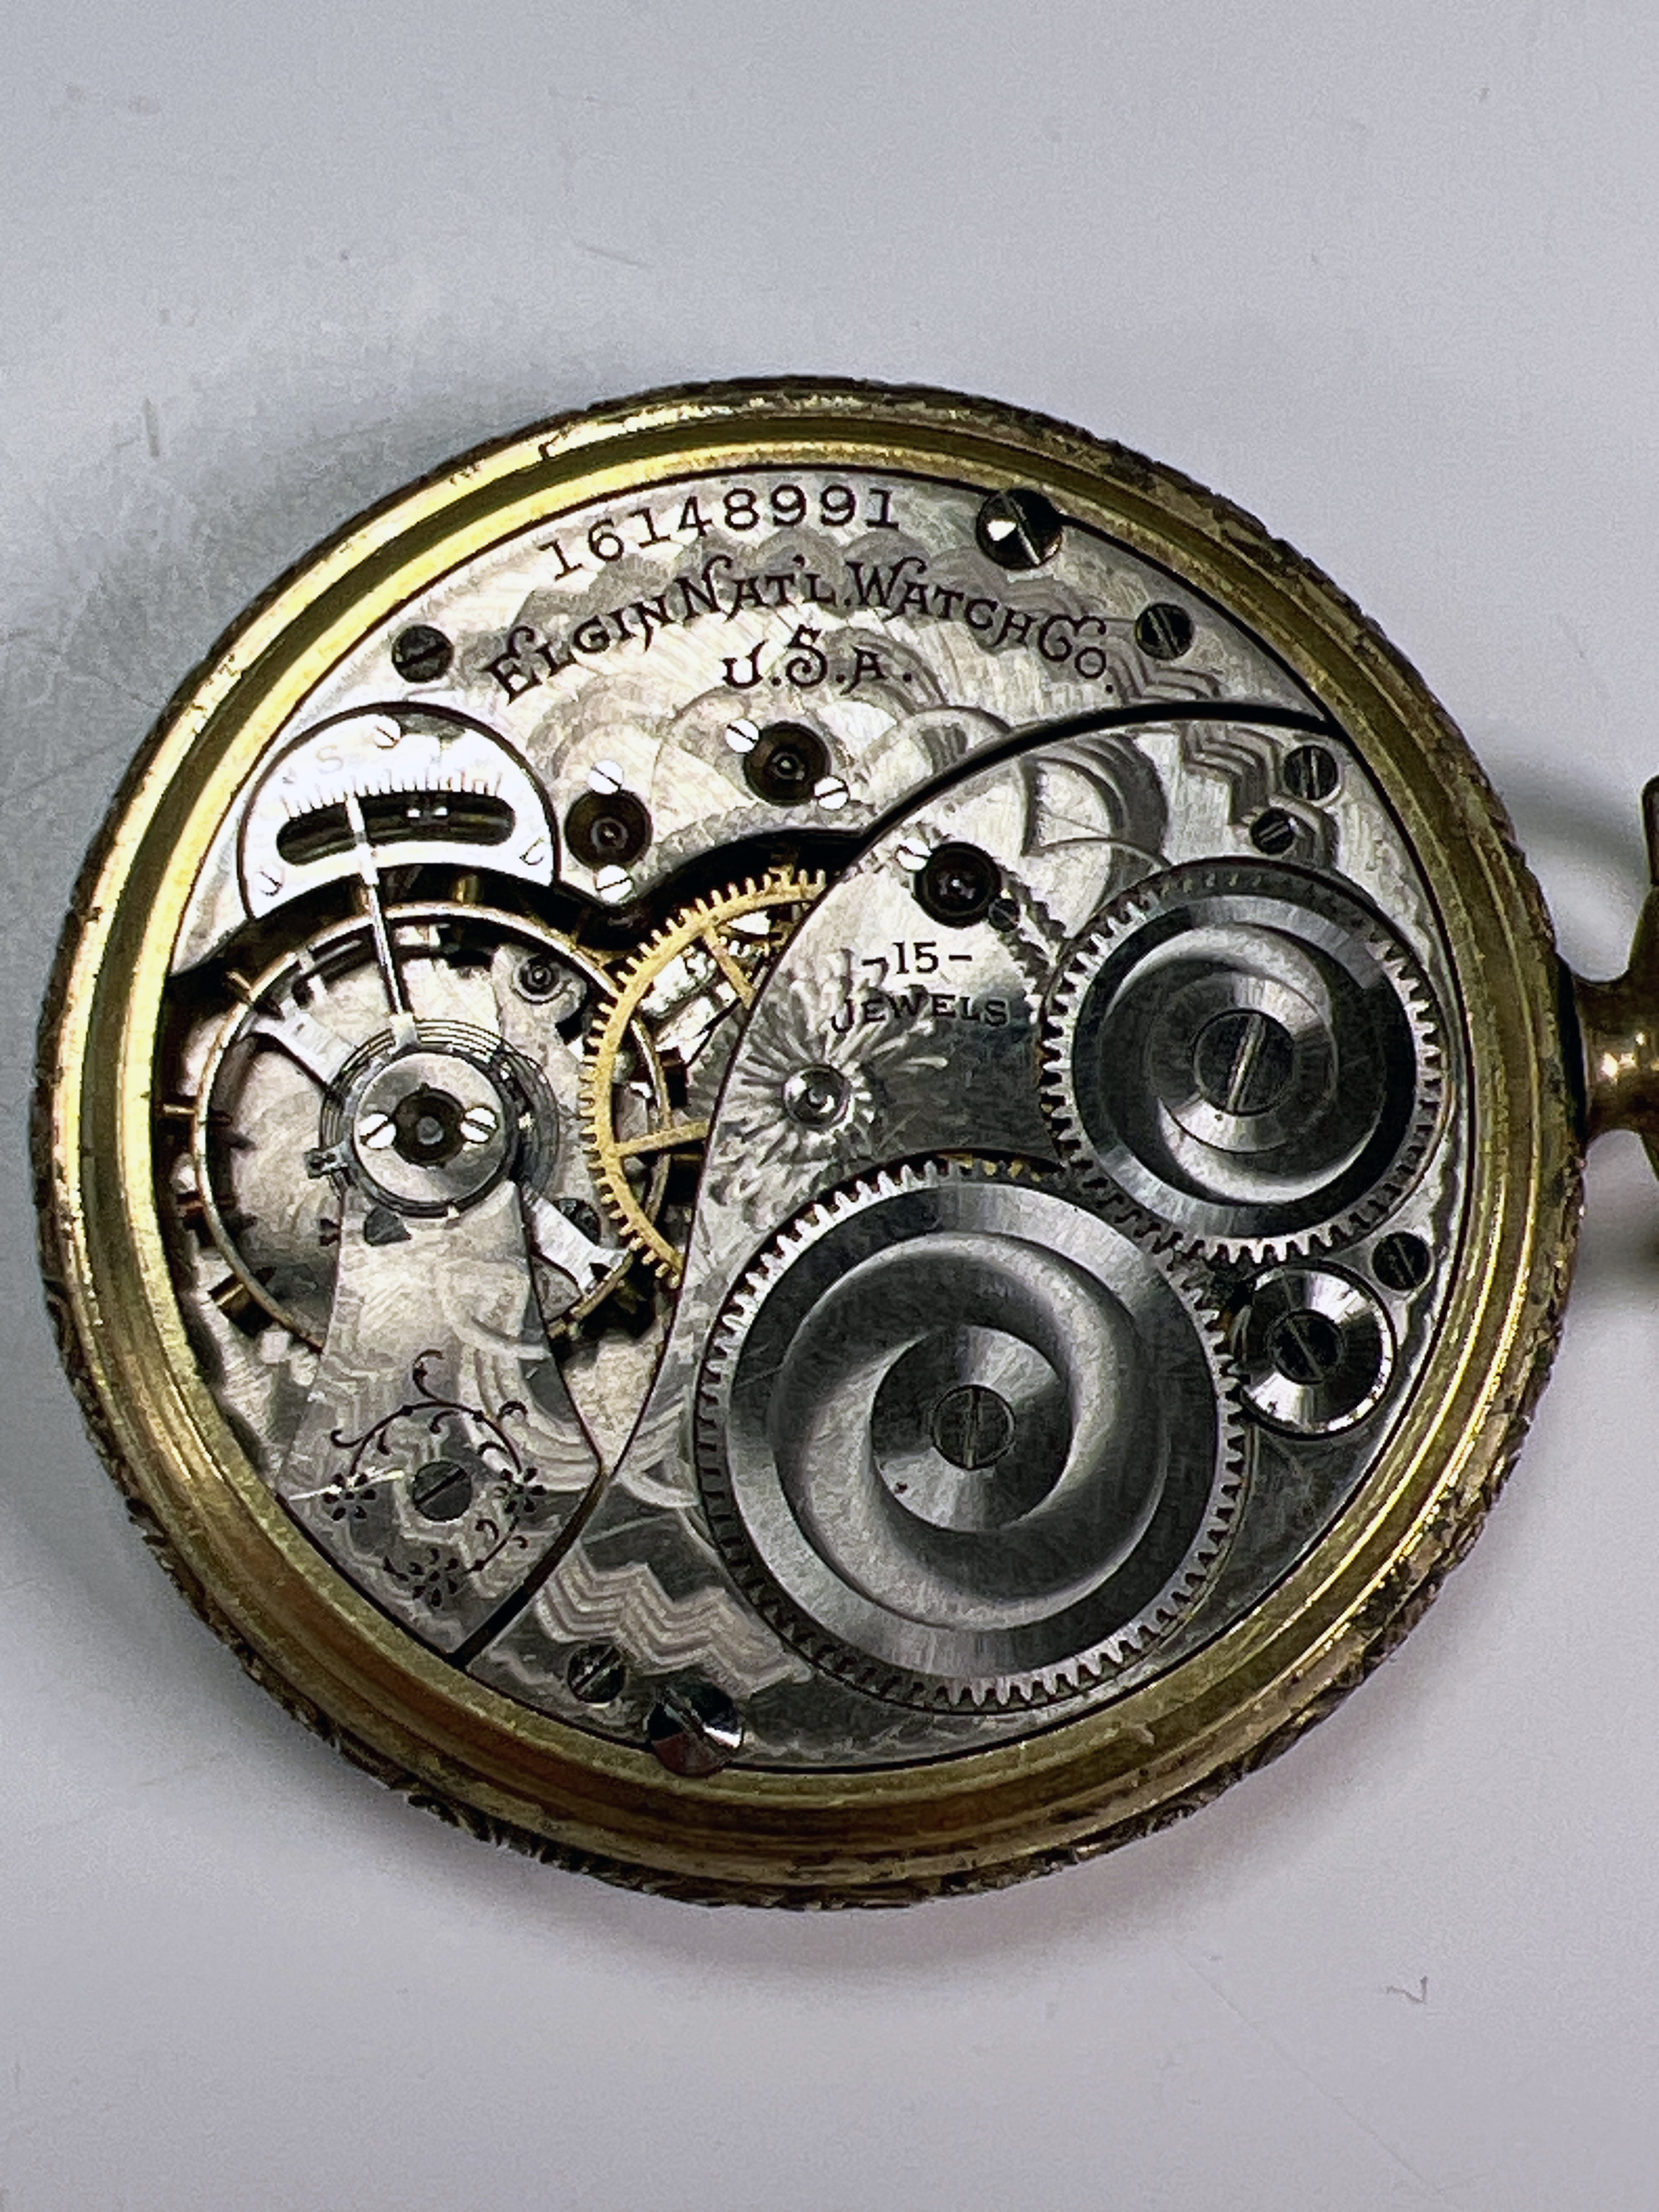 National Watch Co & Elgin Pocket Watches image 7